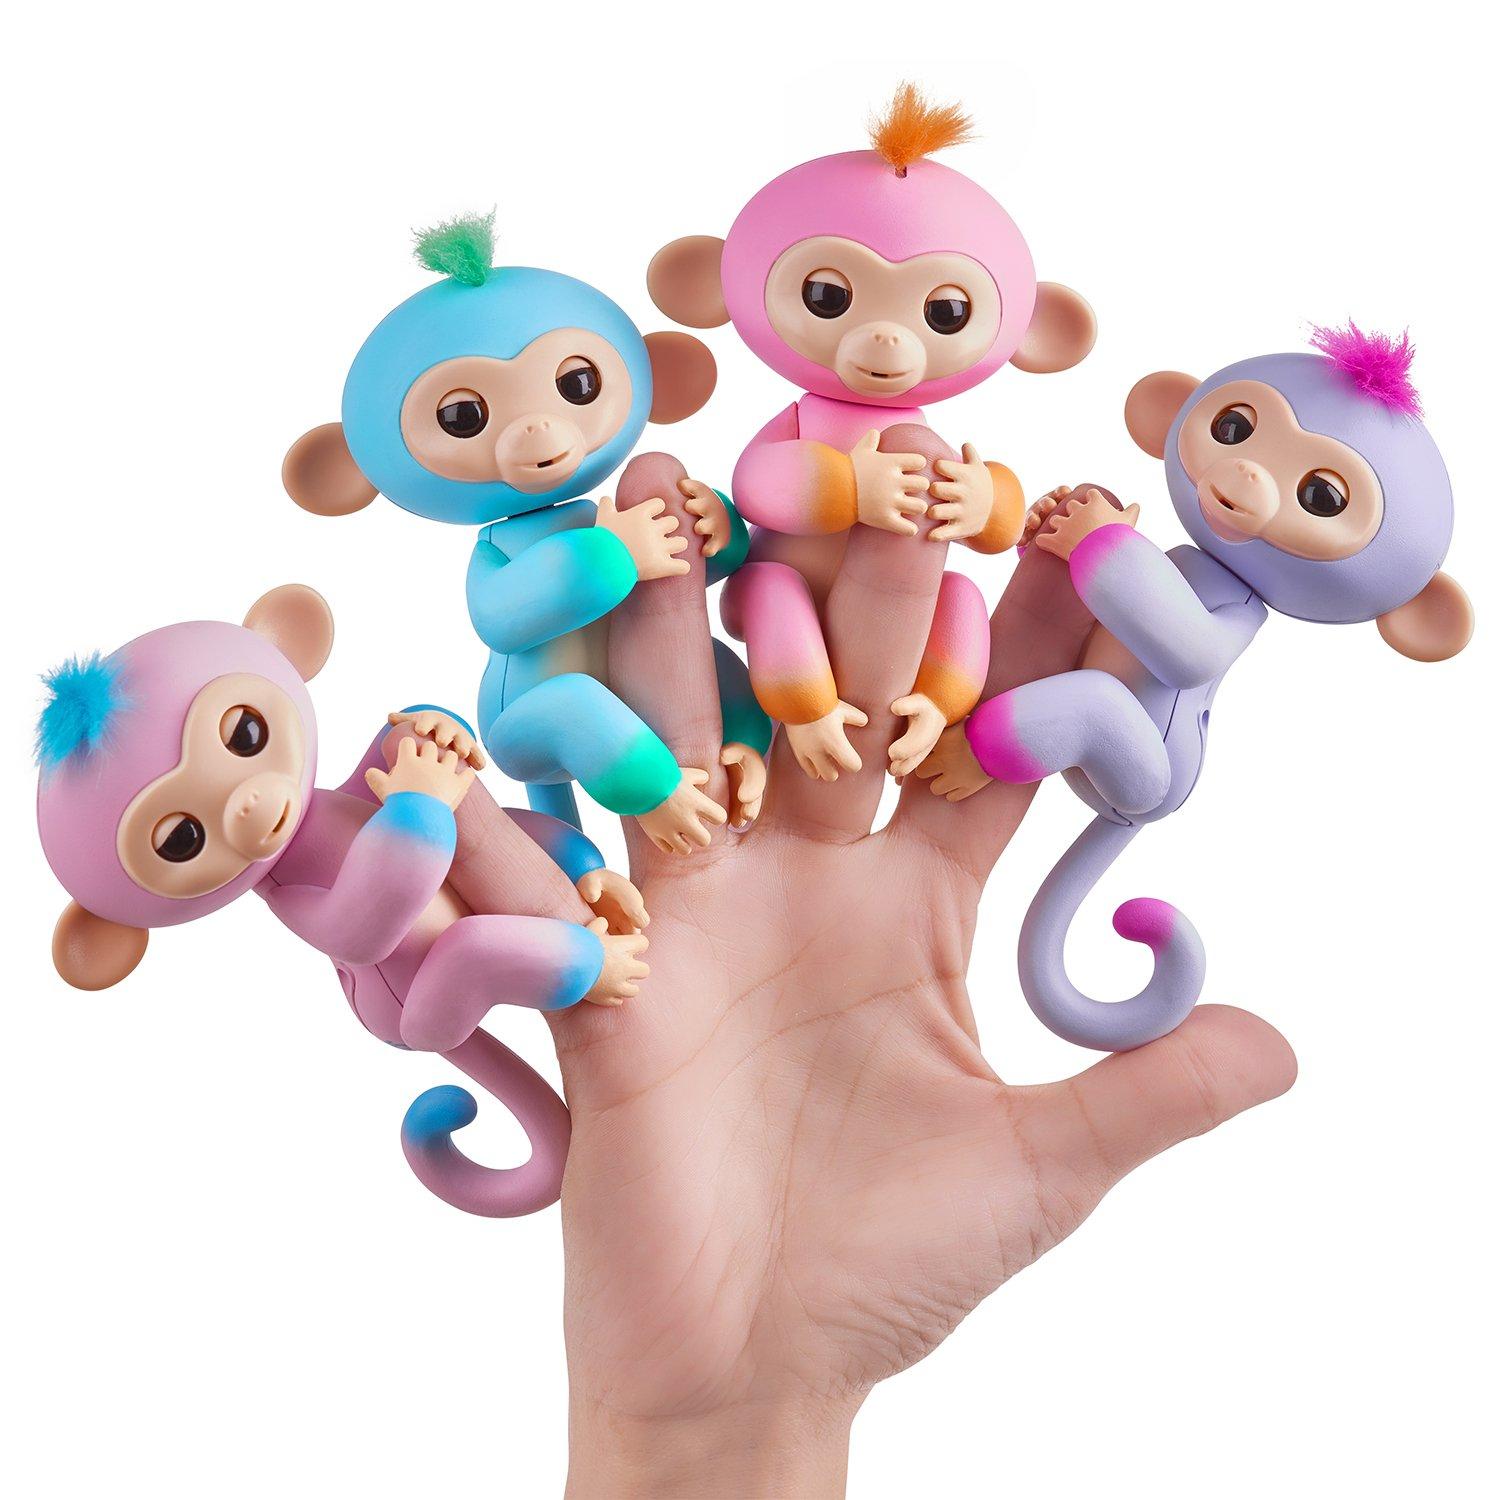 10. Colorful Pink and Blue Hair Fingerling Names - wide 9